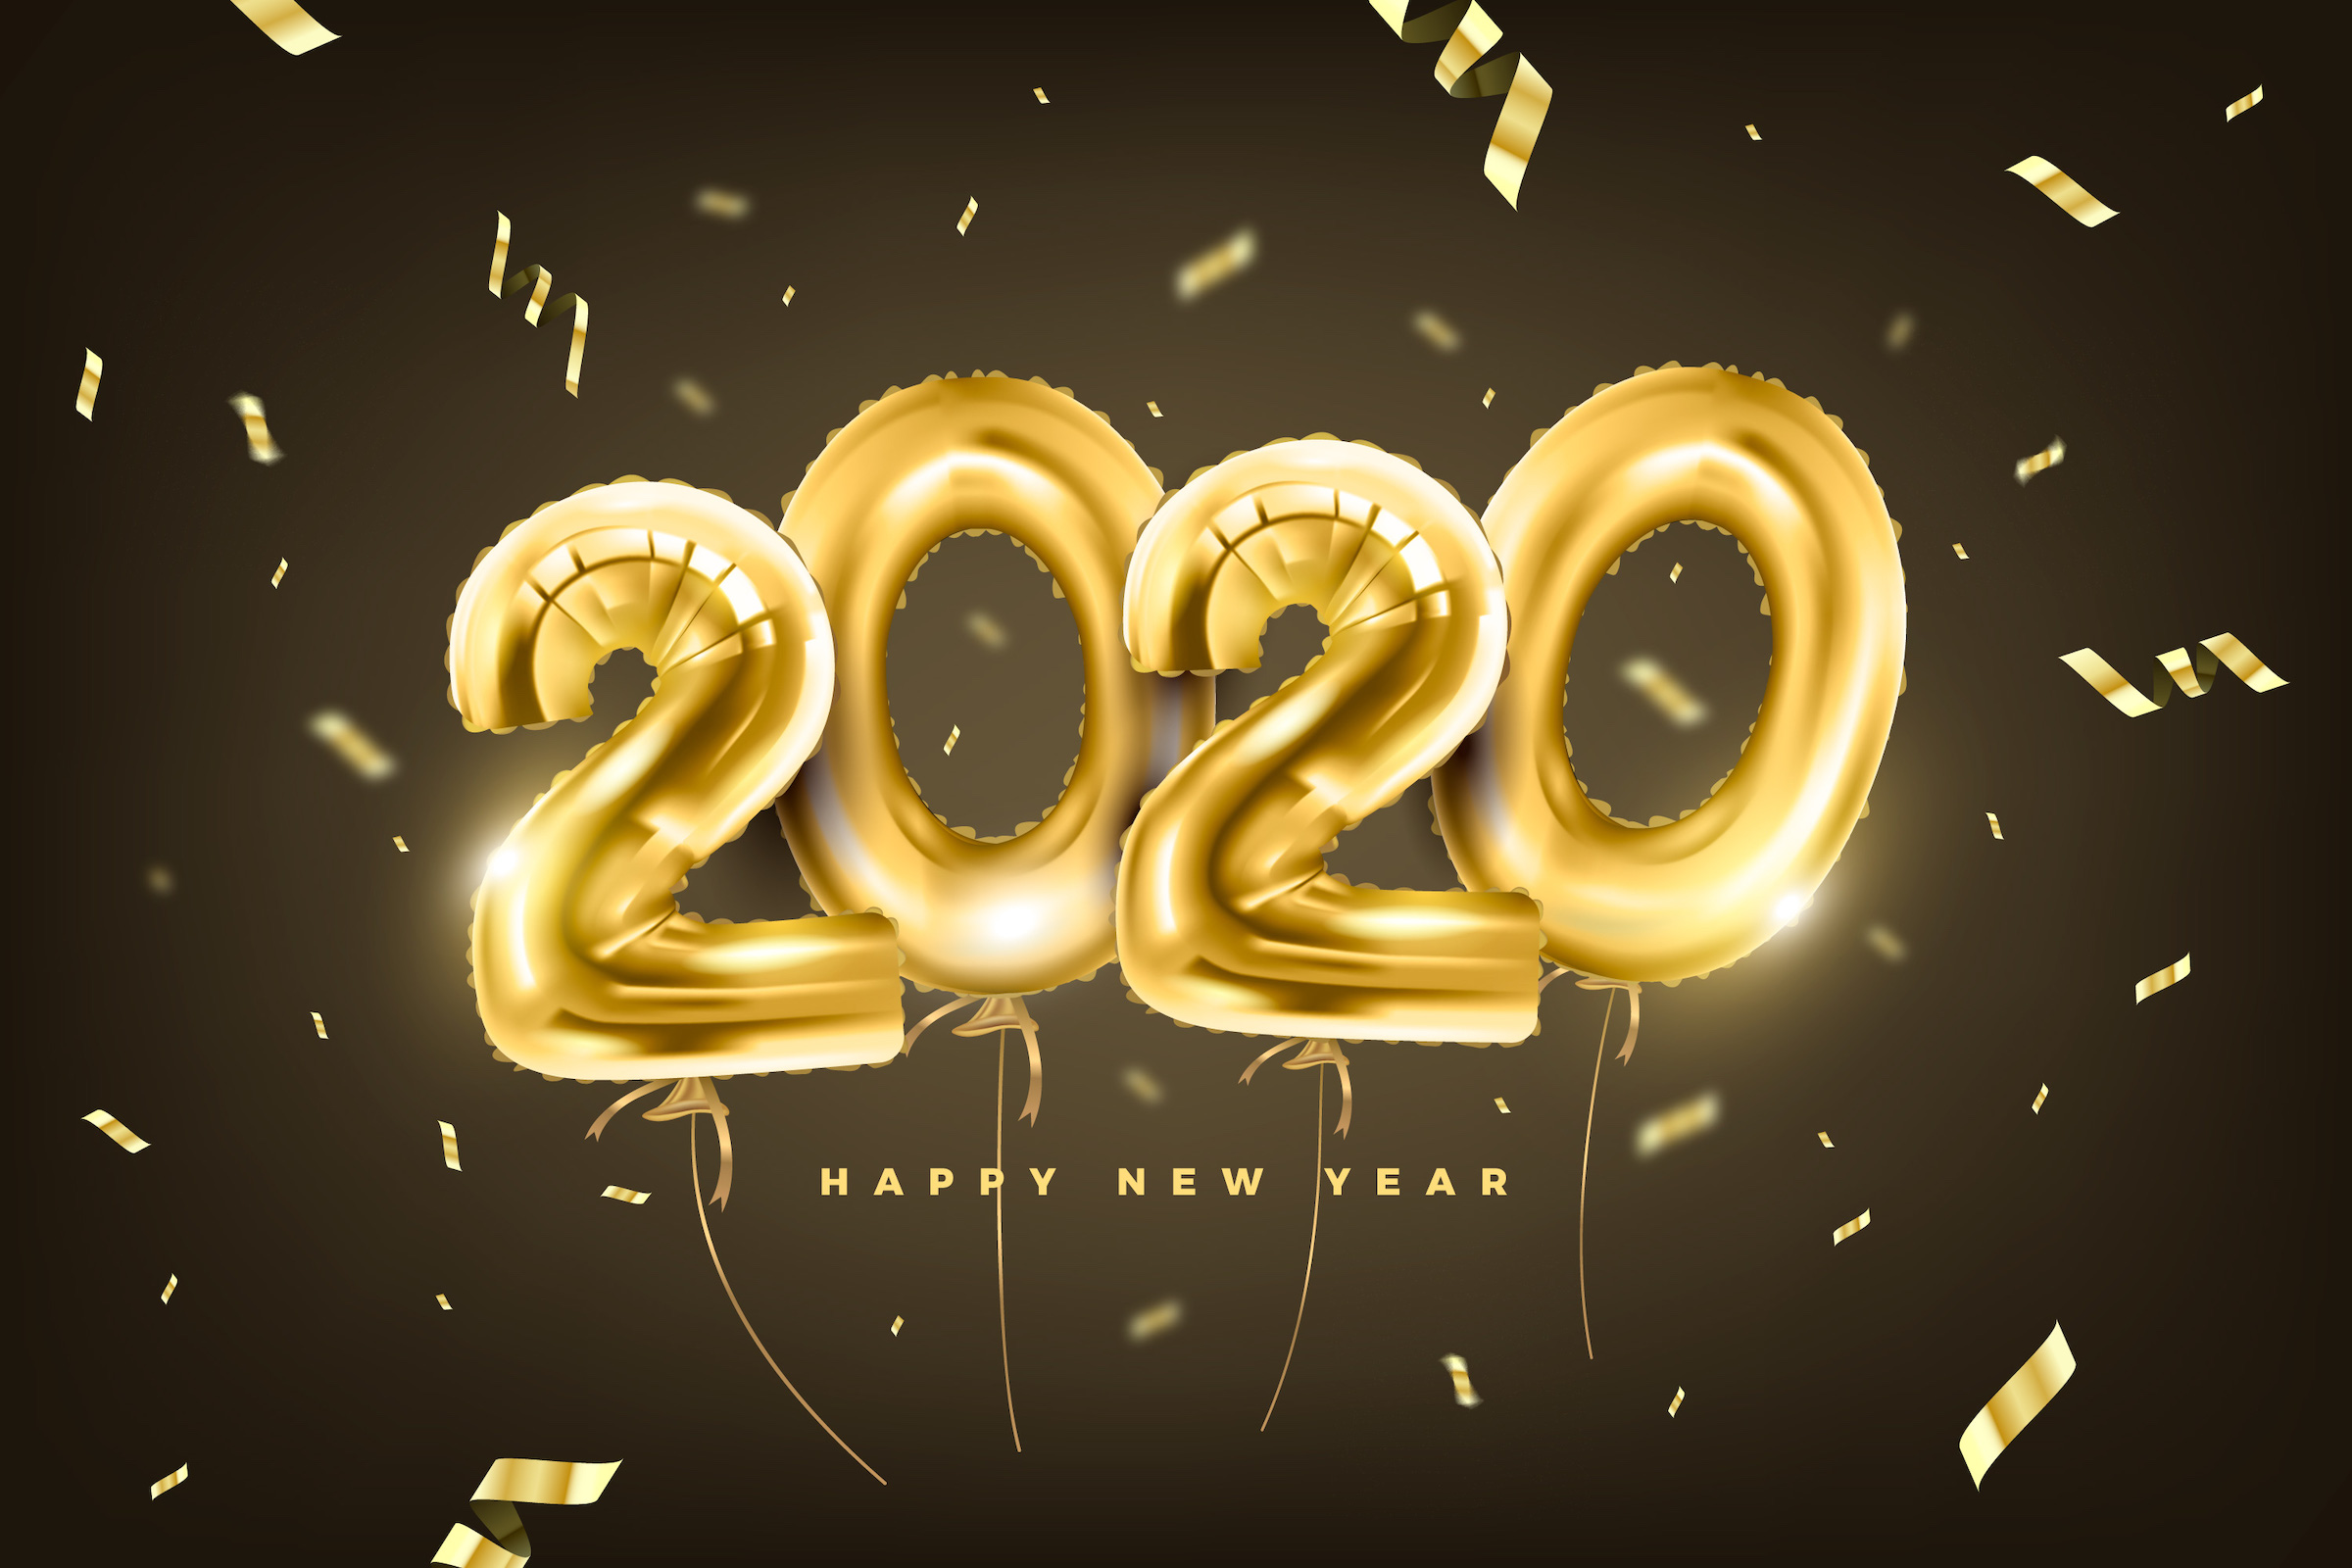 Realistic New Year 2020 Balloons Background